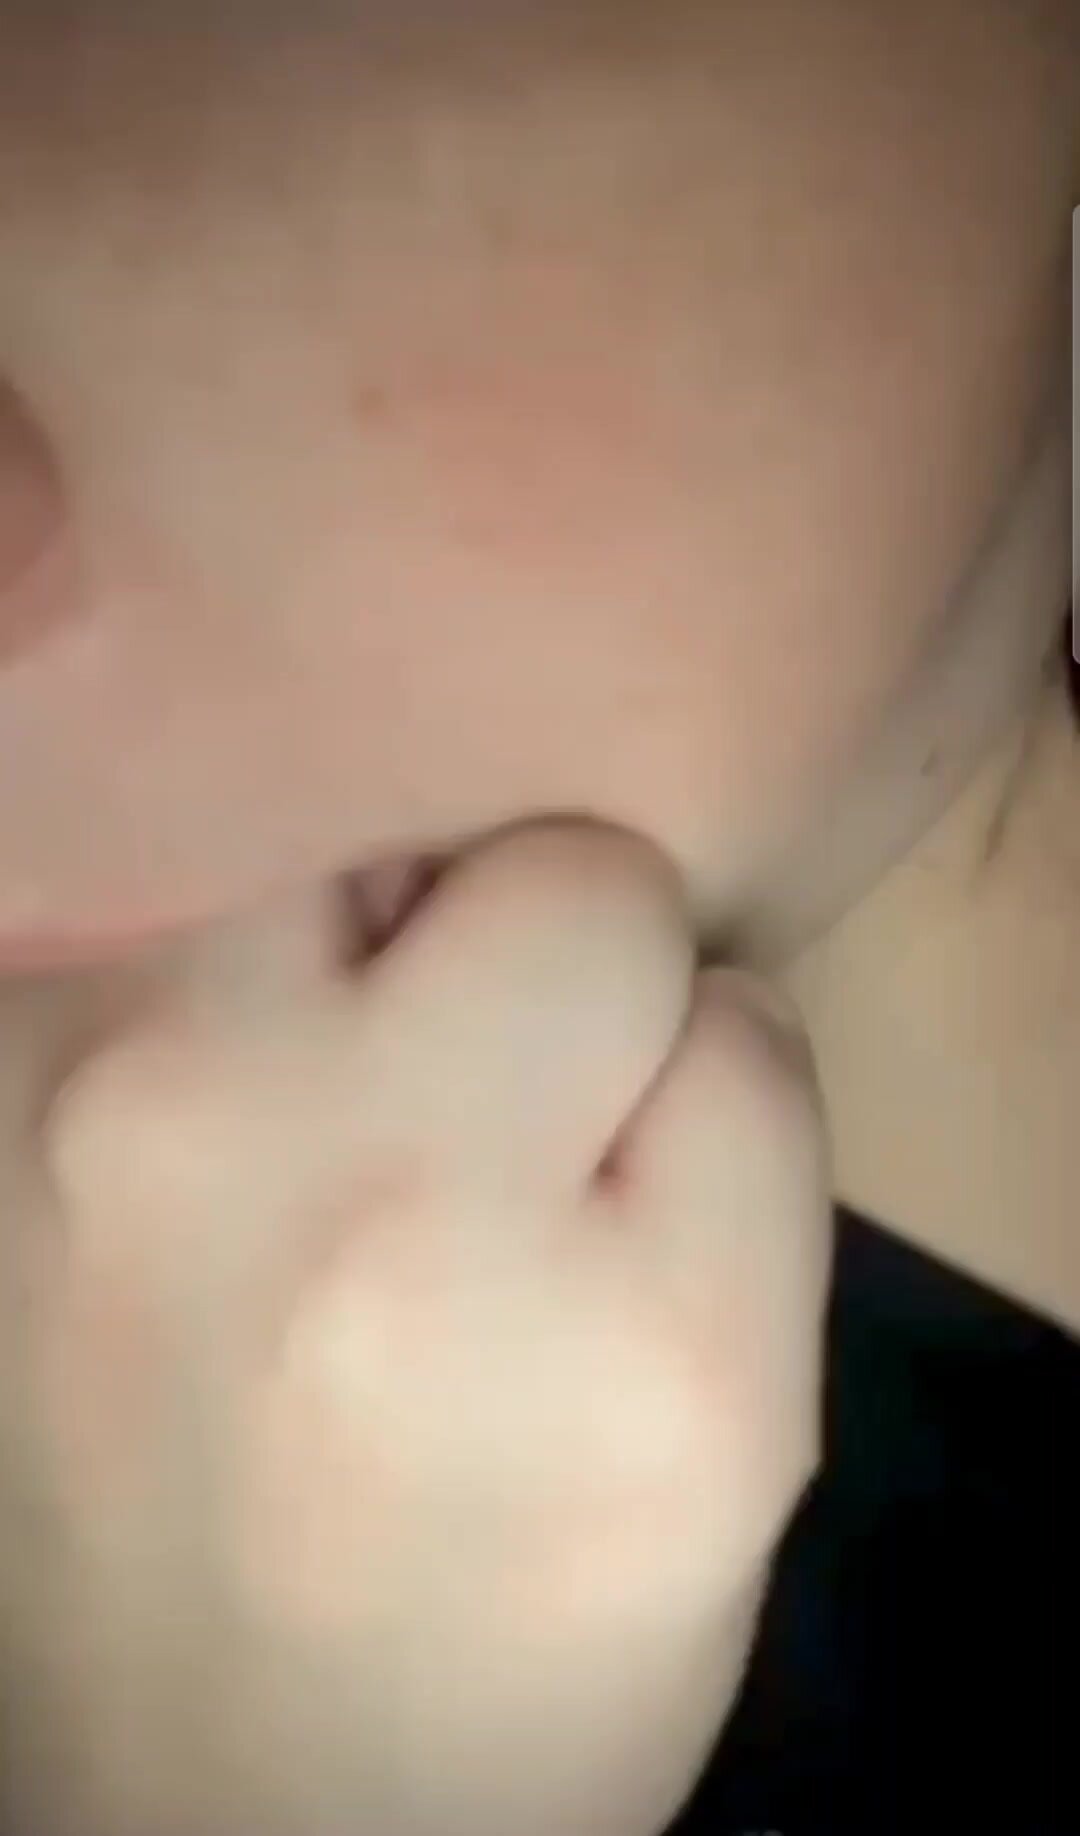 Gagging on her fingers